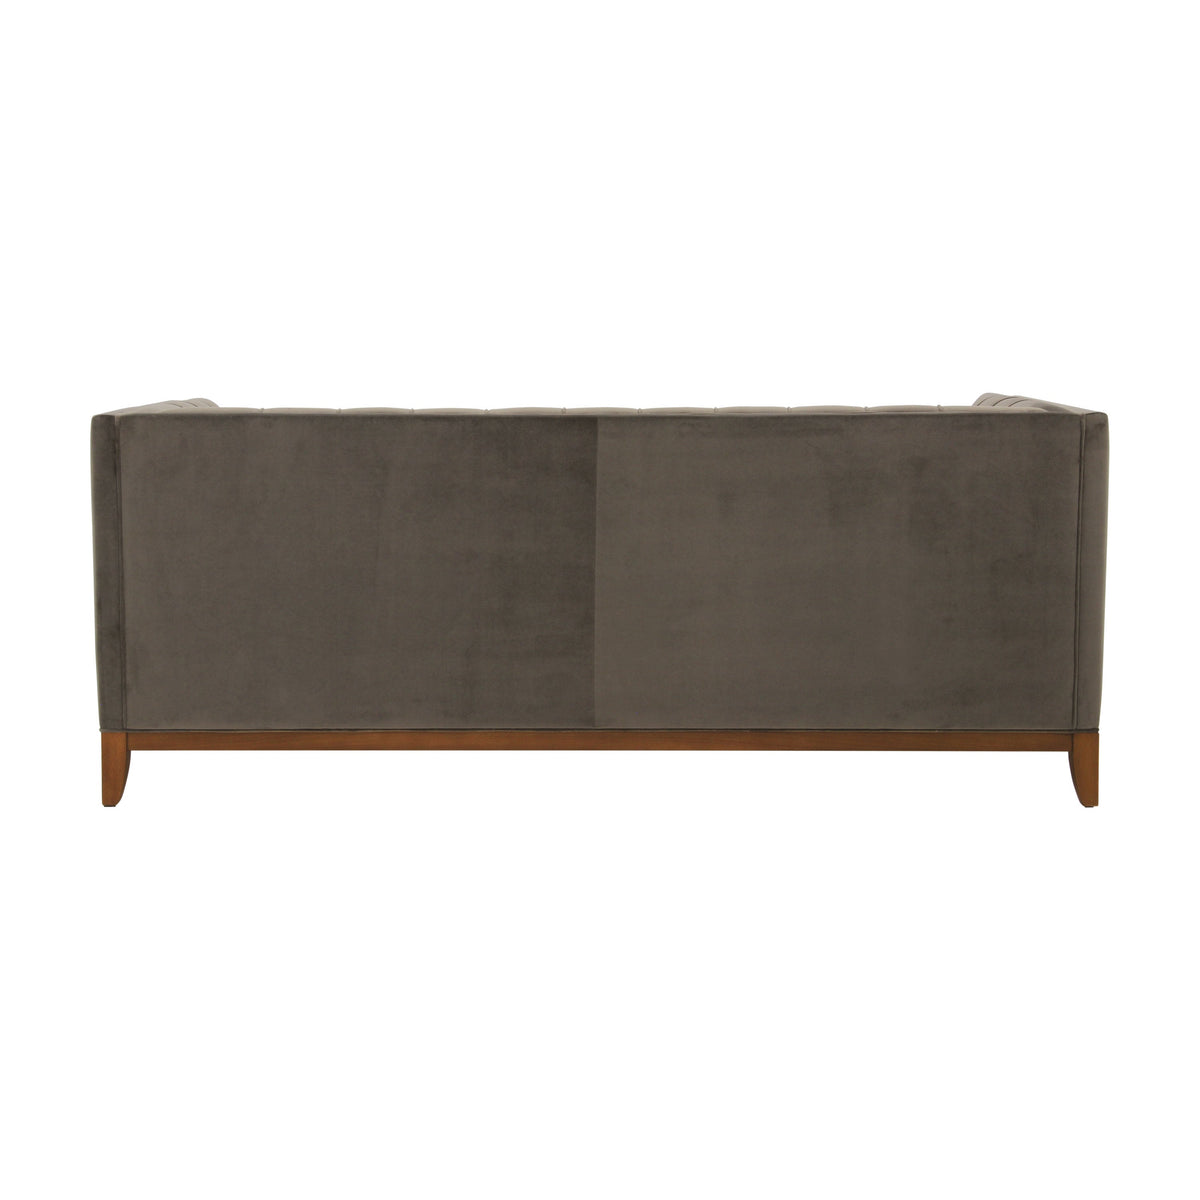 Lixis Sofa-Seven Sedie-Contract Furniture Store